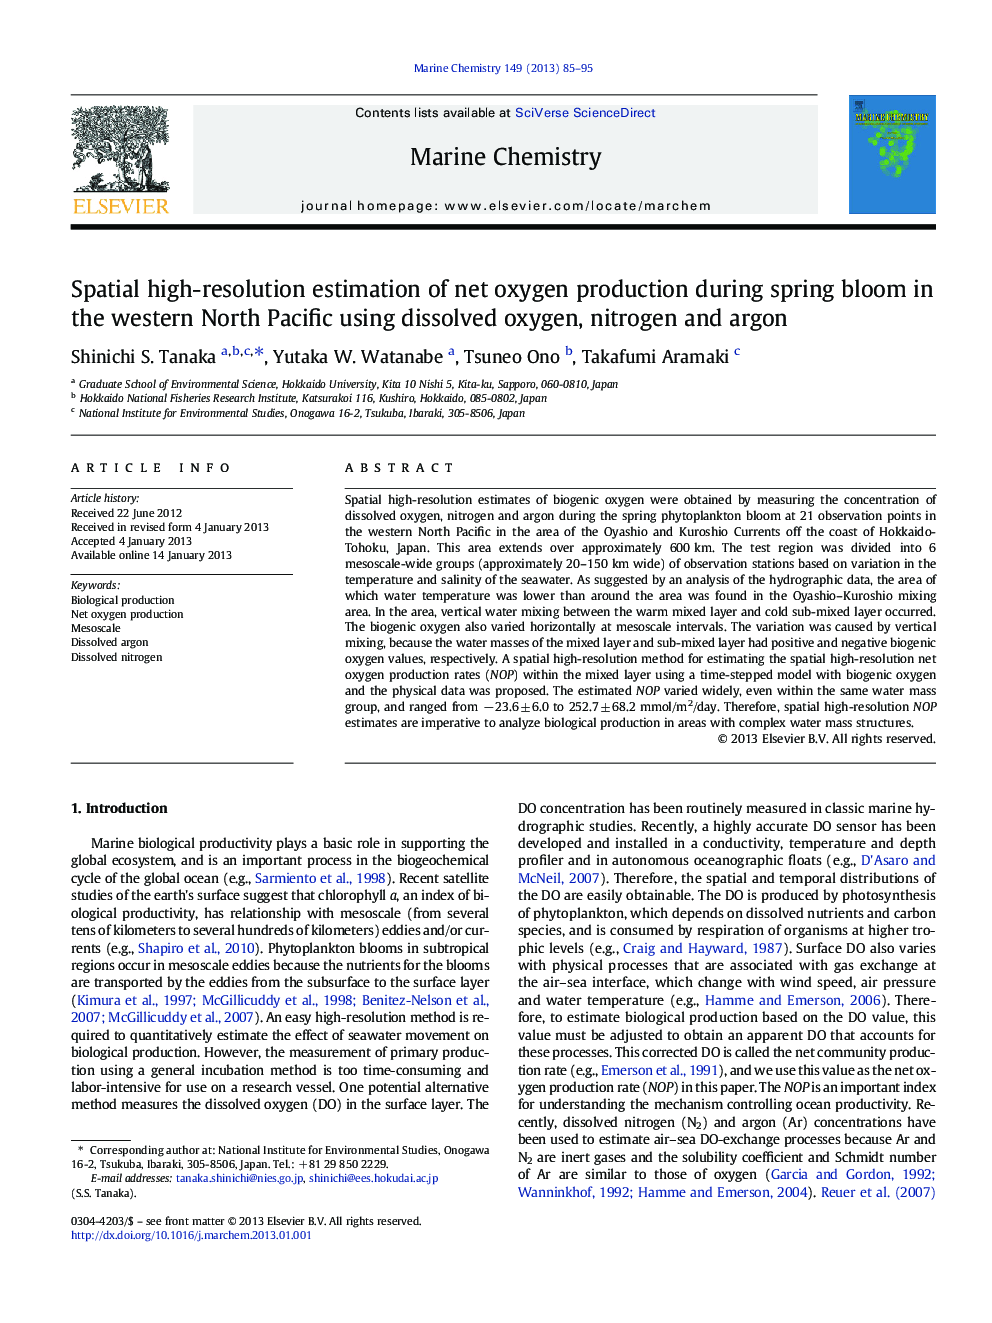 Spatial high-resolution estimation of net oxygen production during spring bloom in the western North Pacific using dissolved oxygen, nitrogen and argon